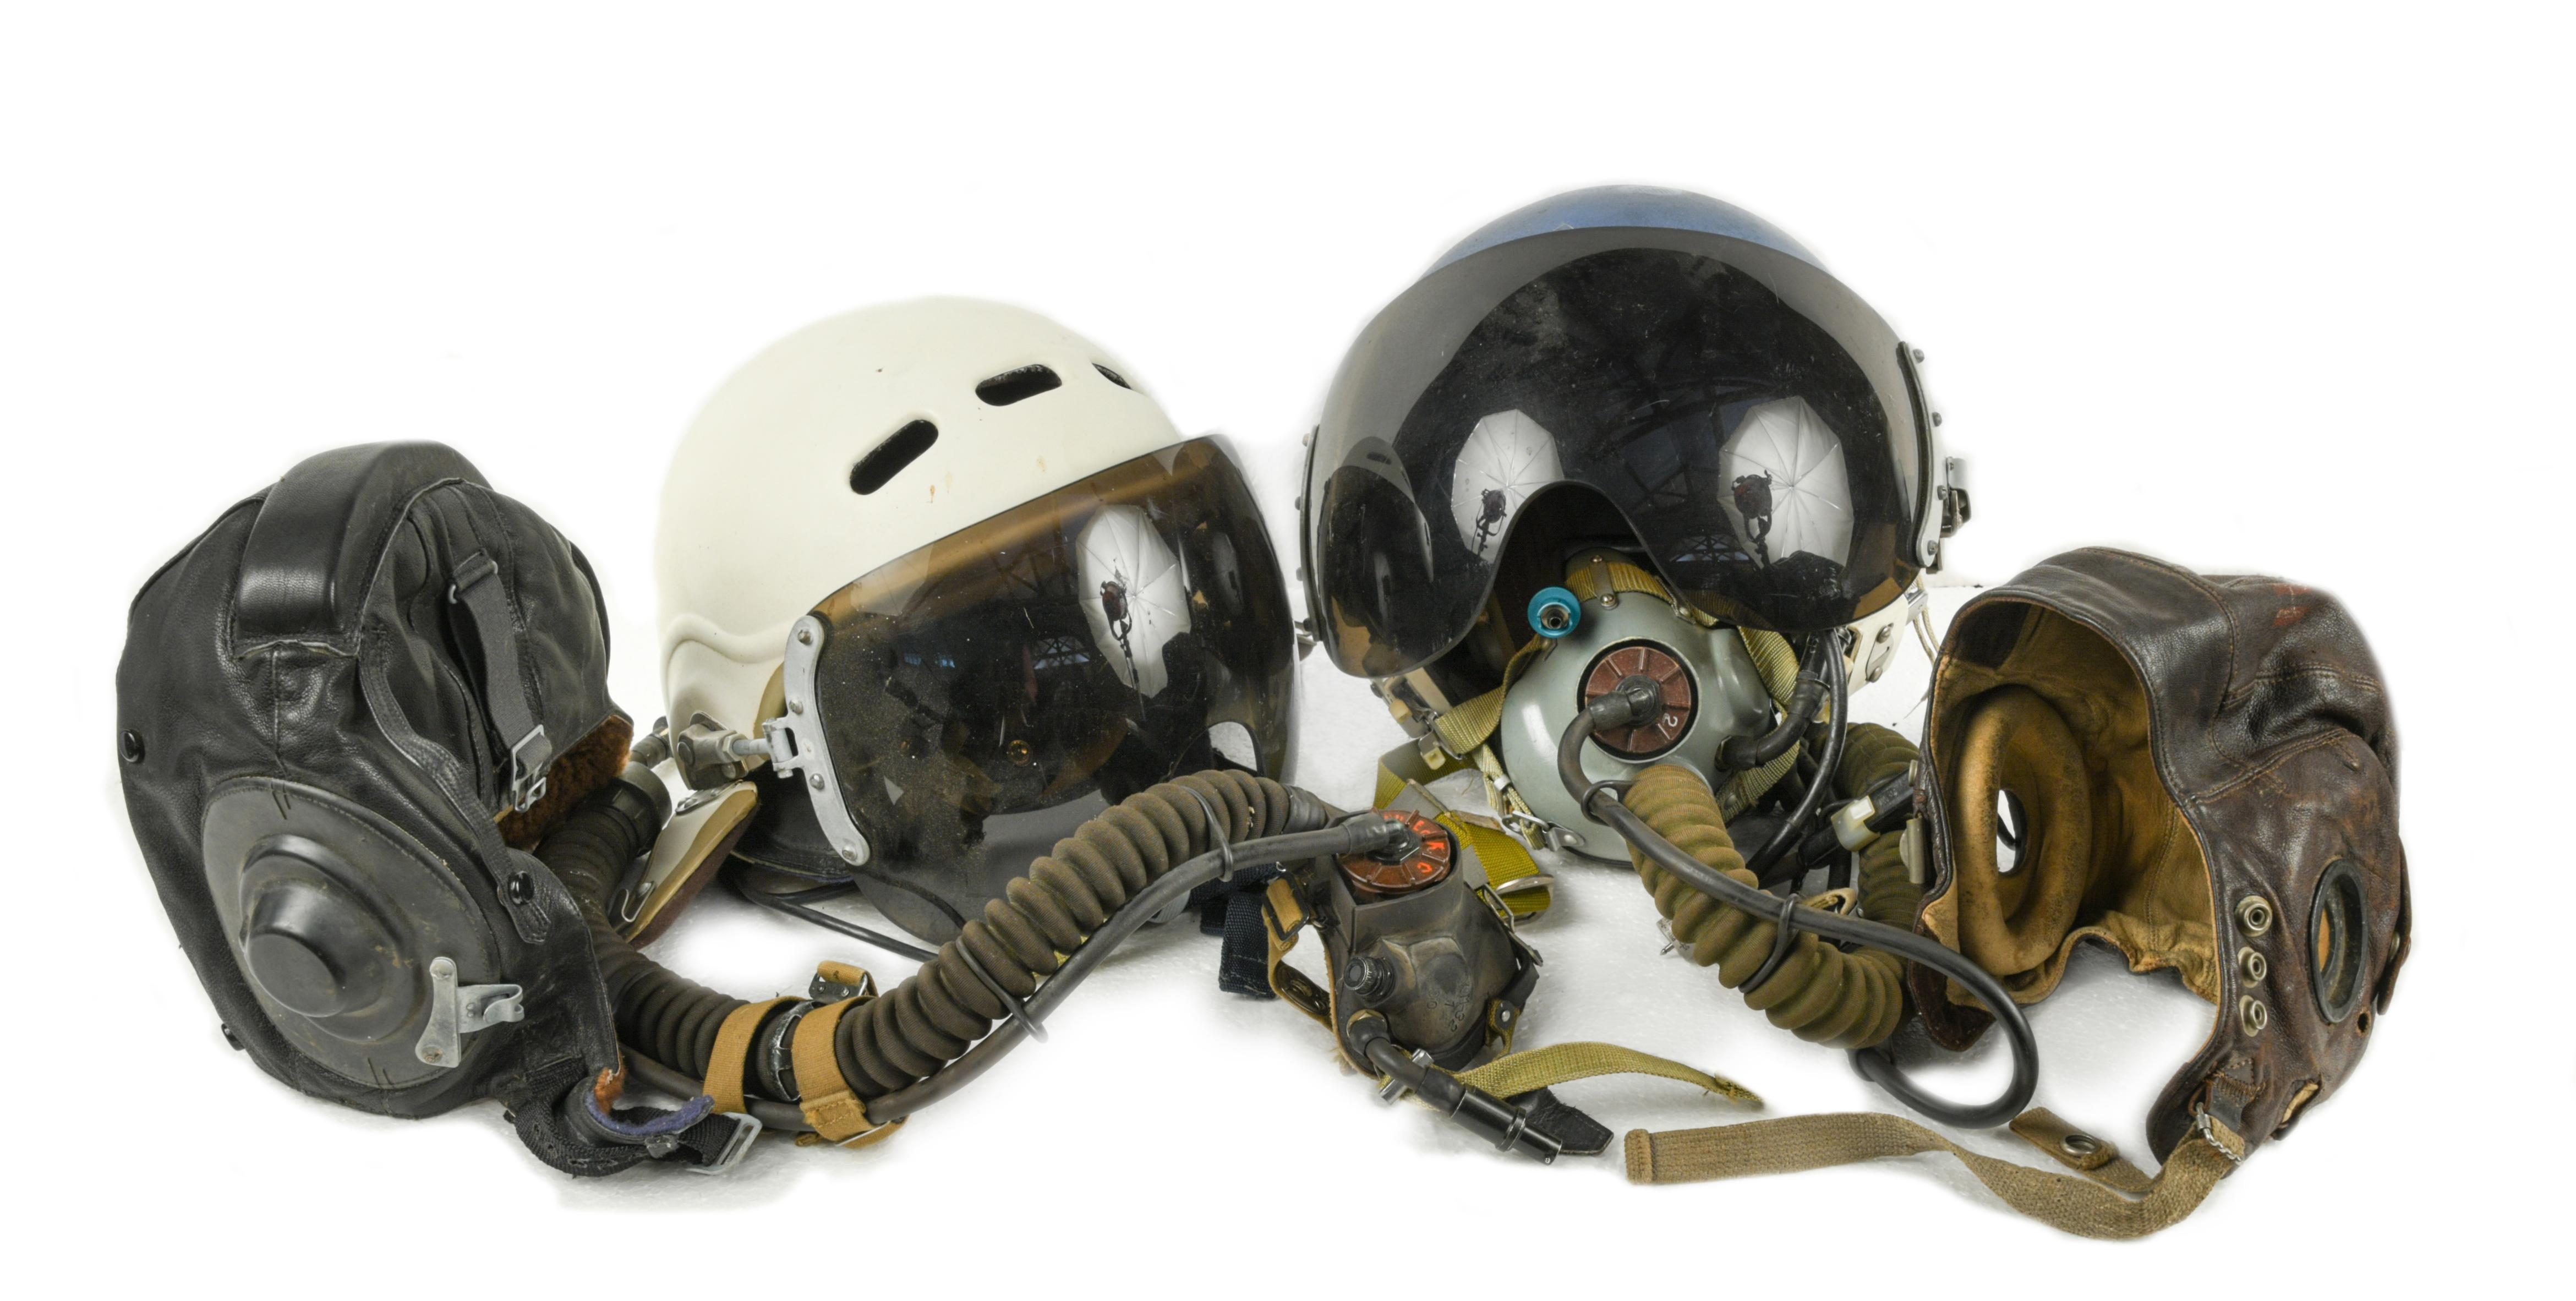 Two aviation helmets, each with tinted visors and oxygen masks, together with two other leather